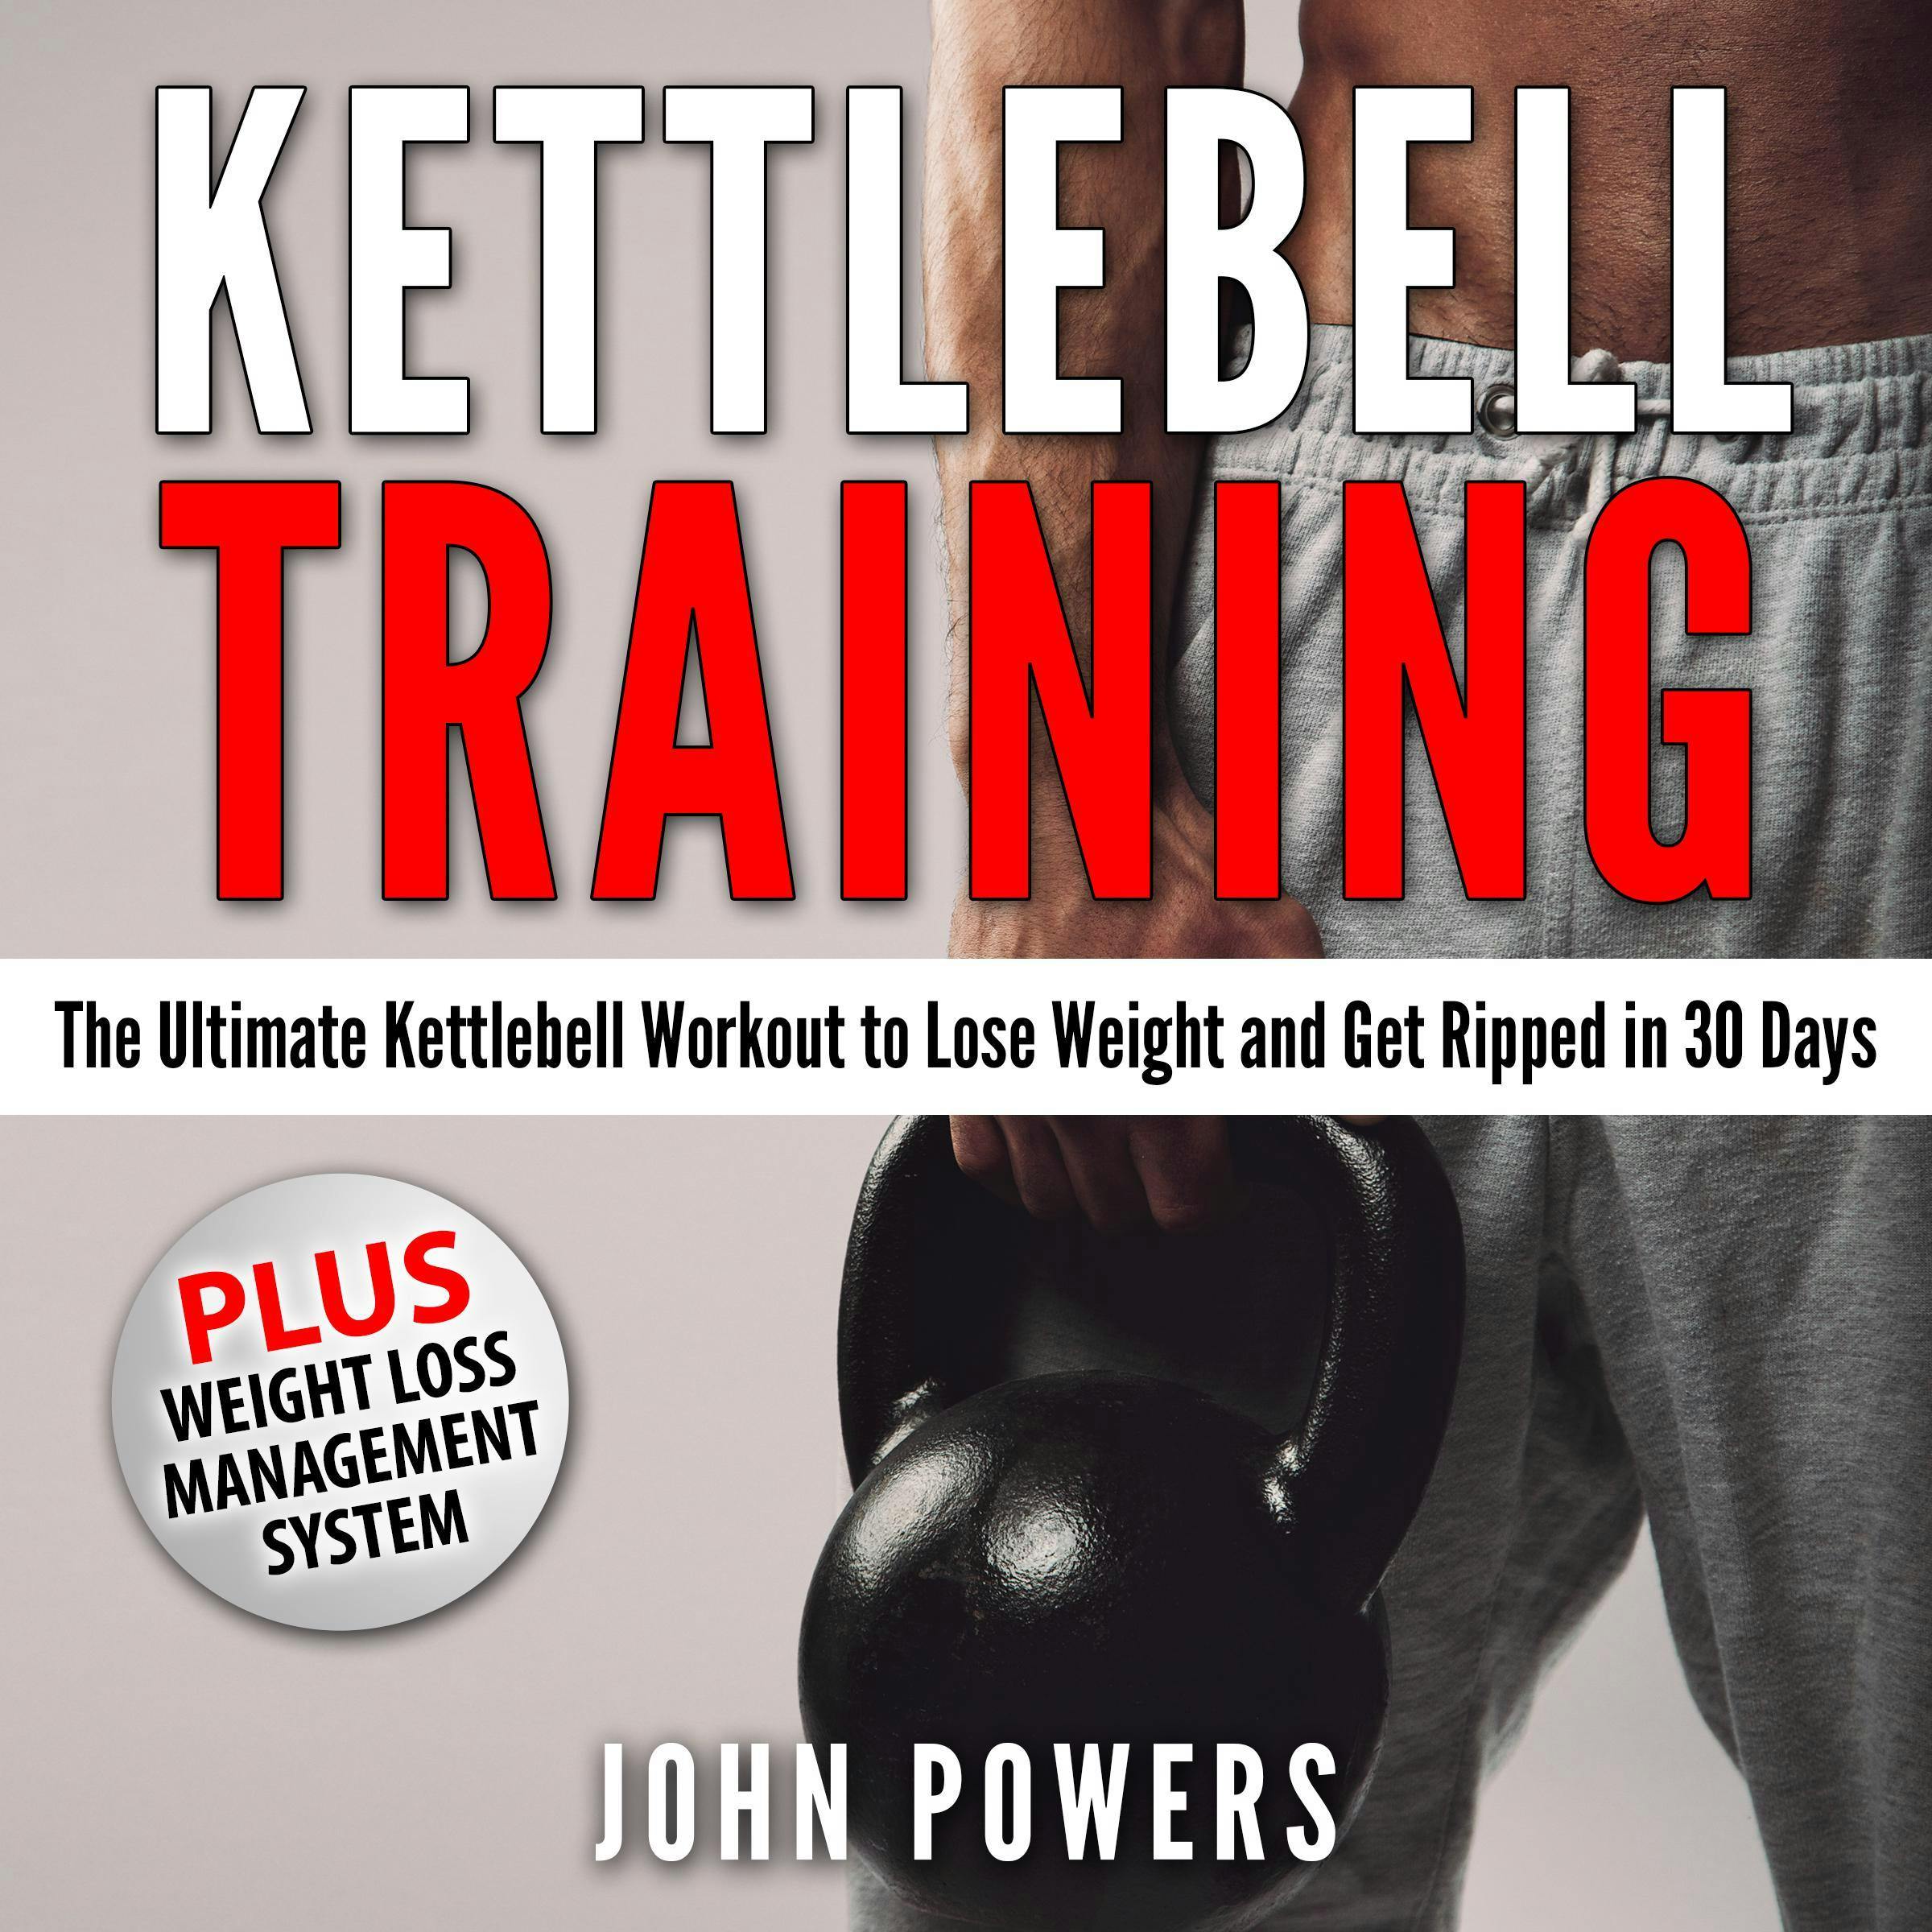 Kettlebell Training: The Ultimate Kettlebell Workout to Lose Weight and Get Ripped in 30 Days - John Powers